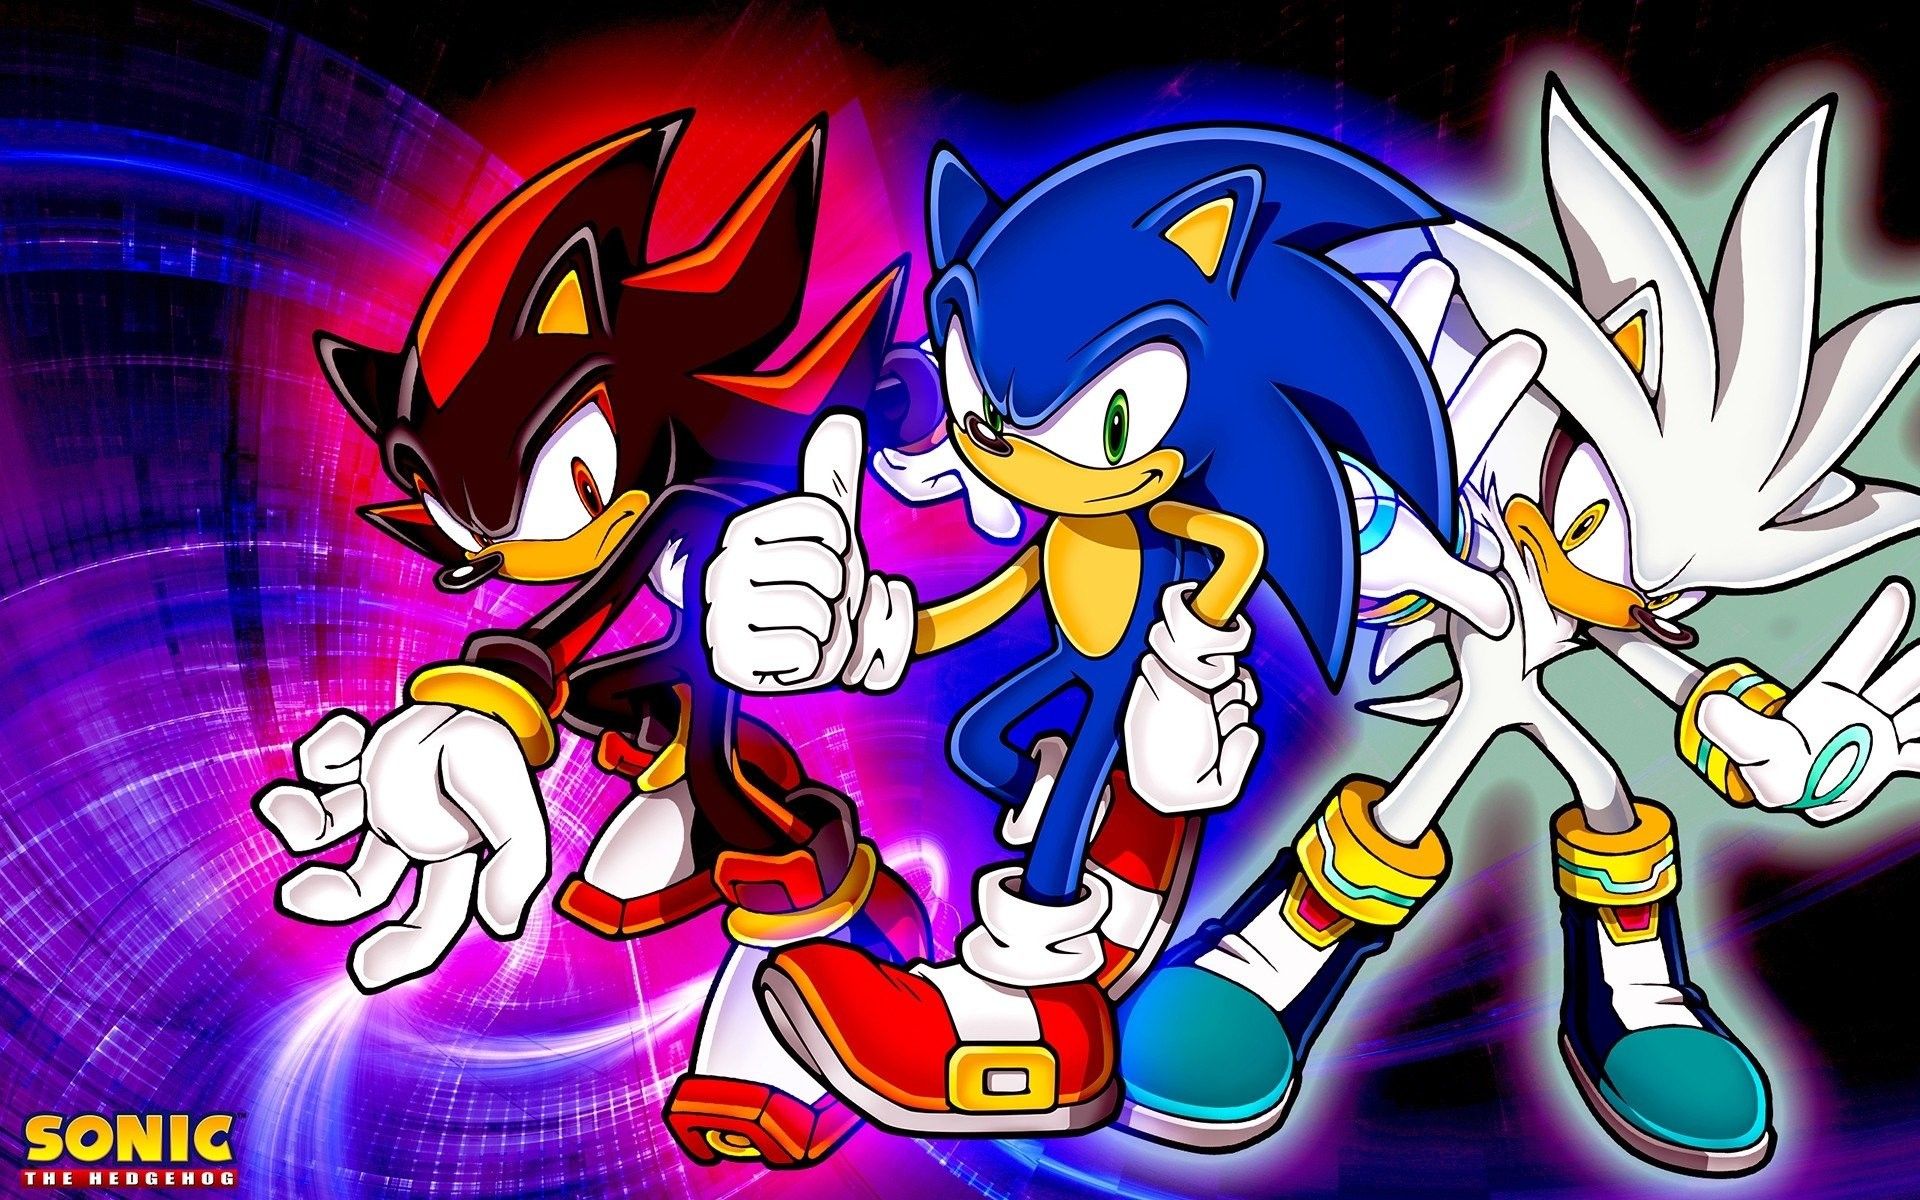 Sonic the hedgehog wallpapers - Sonic